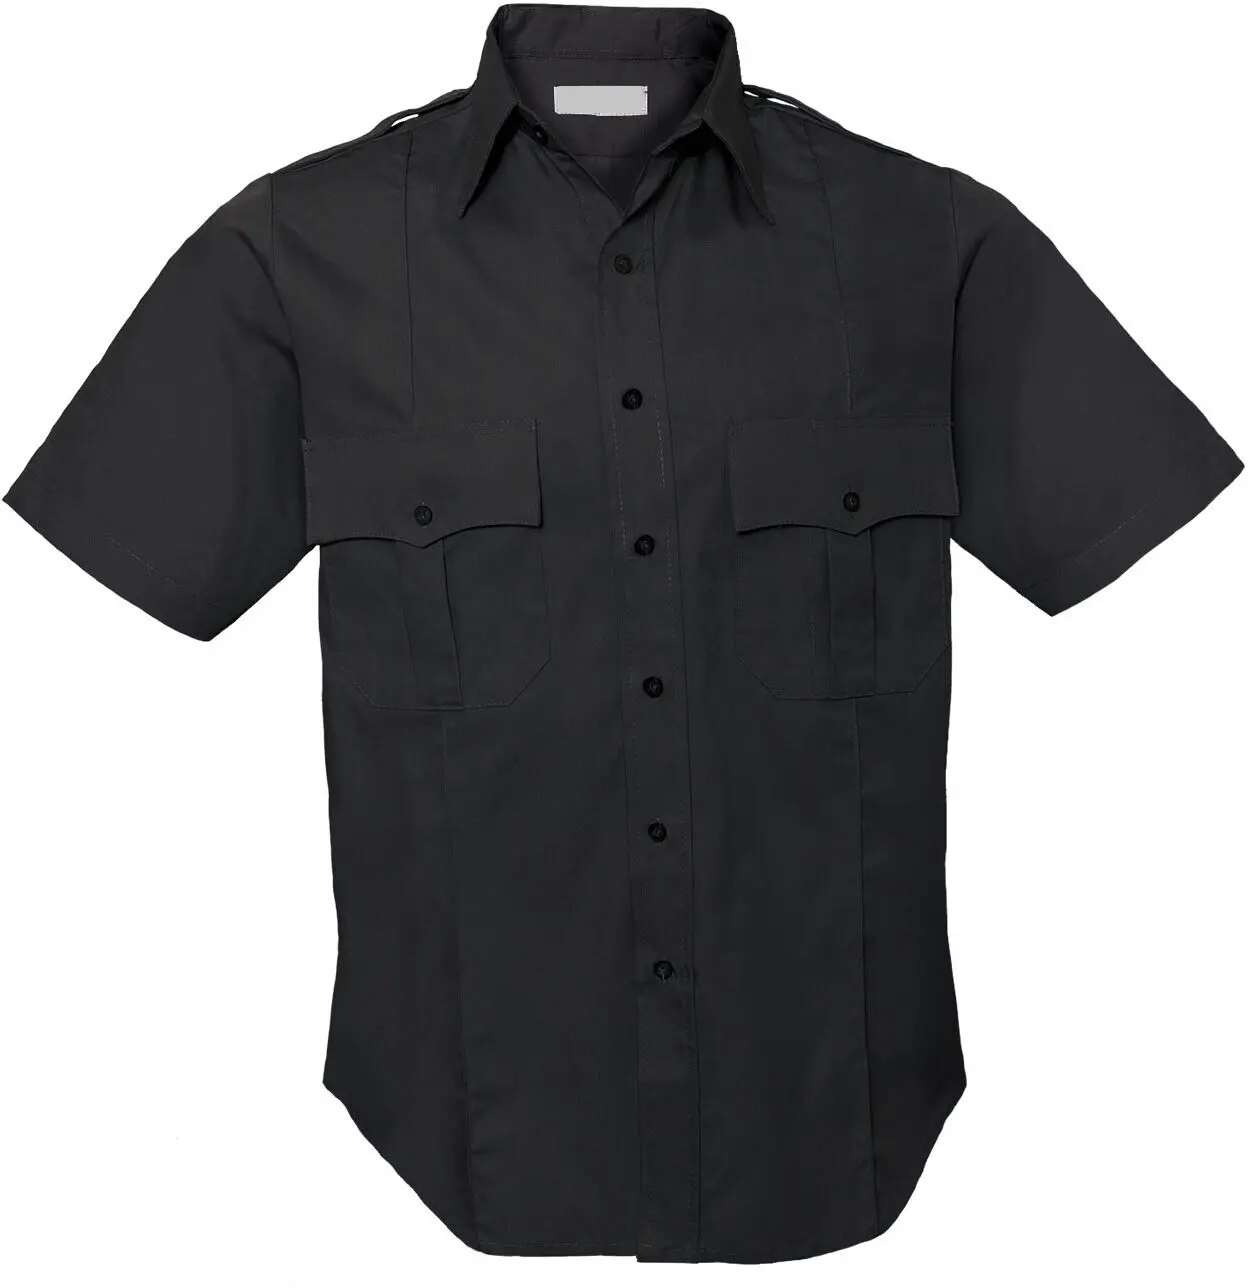 workwear labor worker 's cotton polyester poplin simple casual short sleeve button up shirts